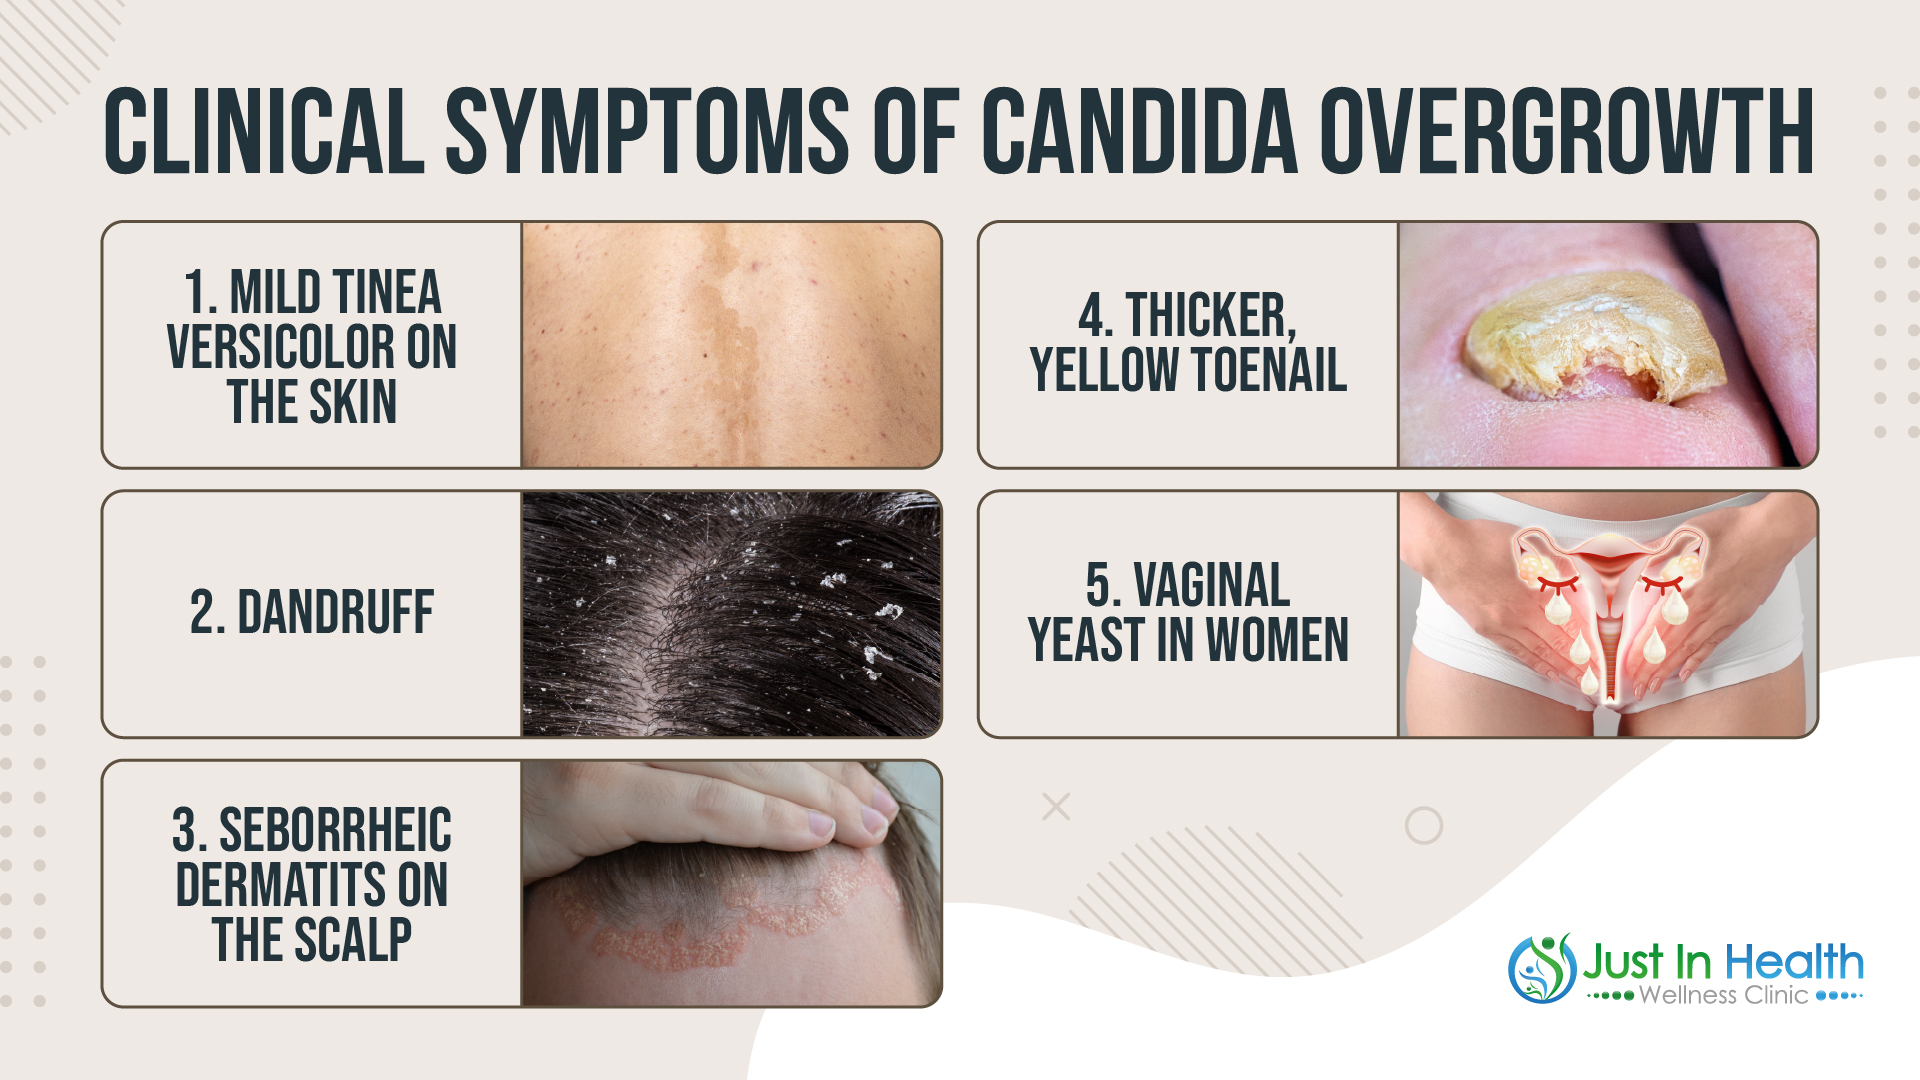 Clinical Symptoms of Candida Overgrowth_Dr. Justin Marchegiani